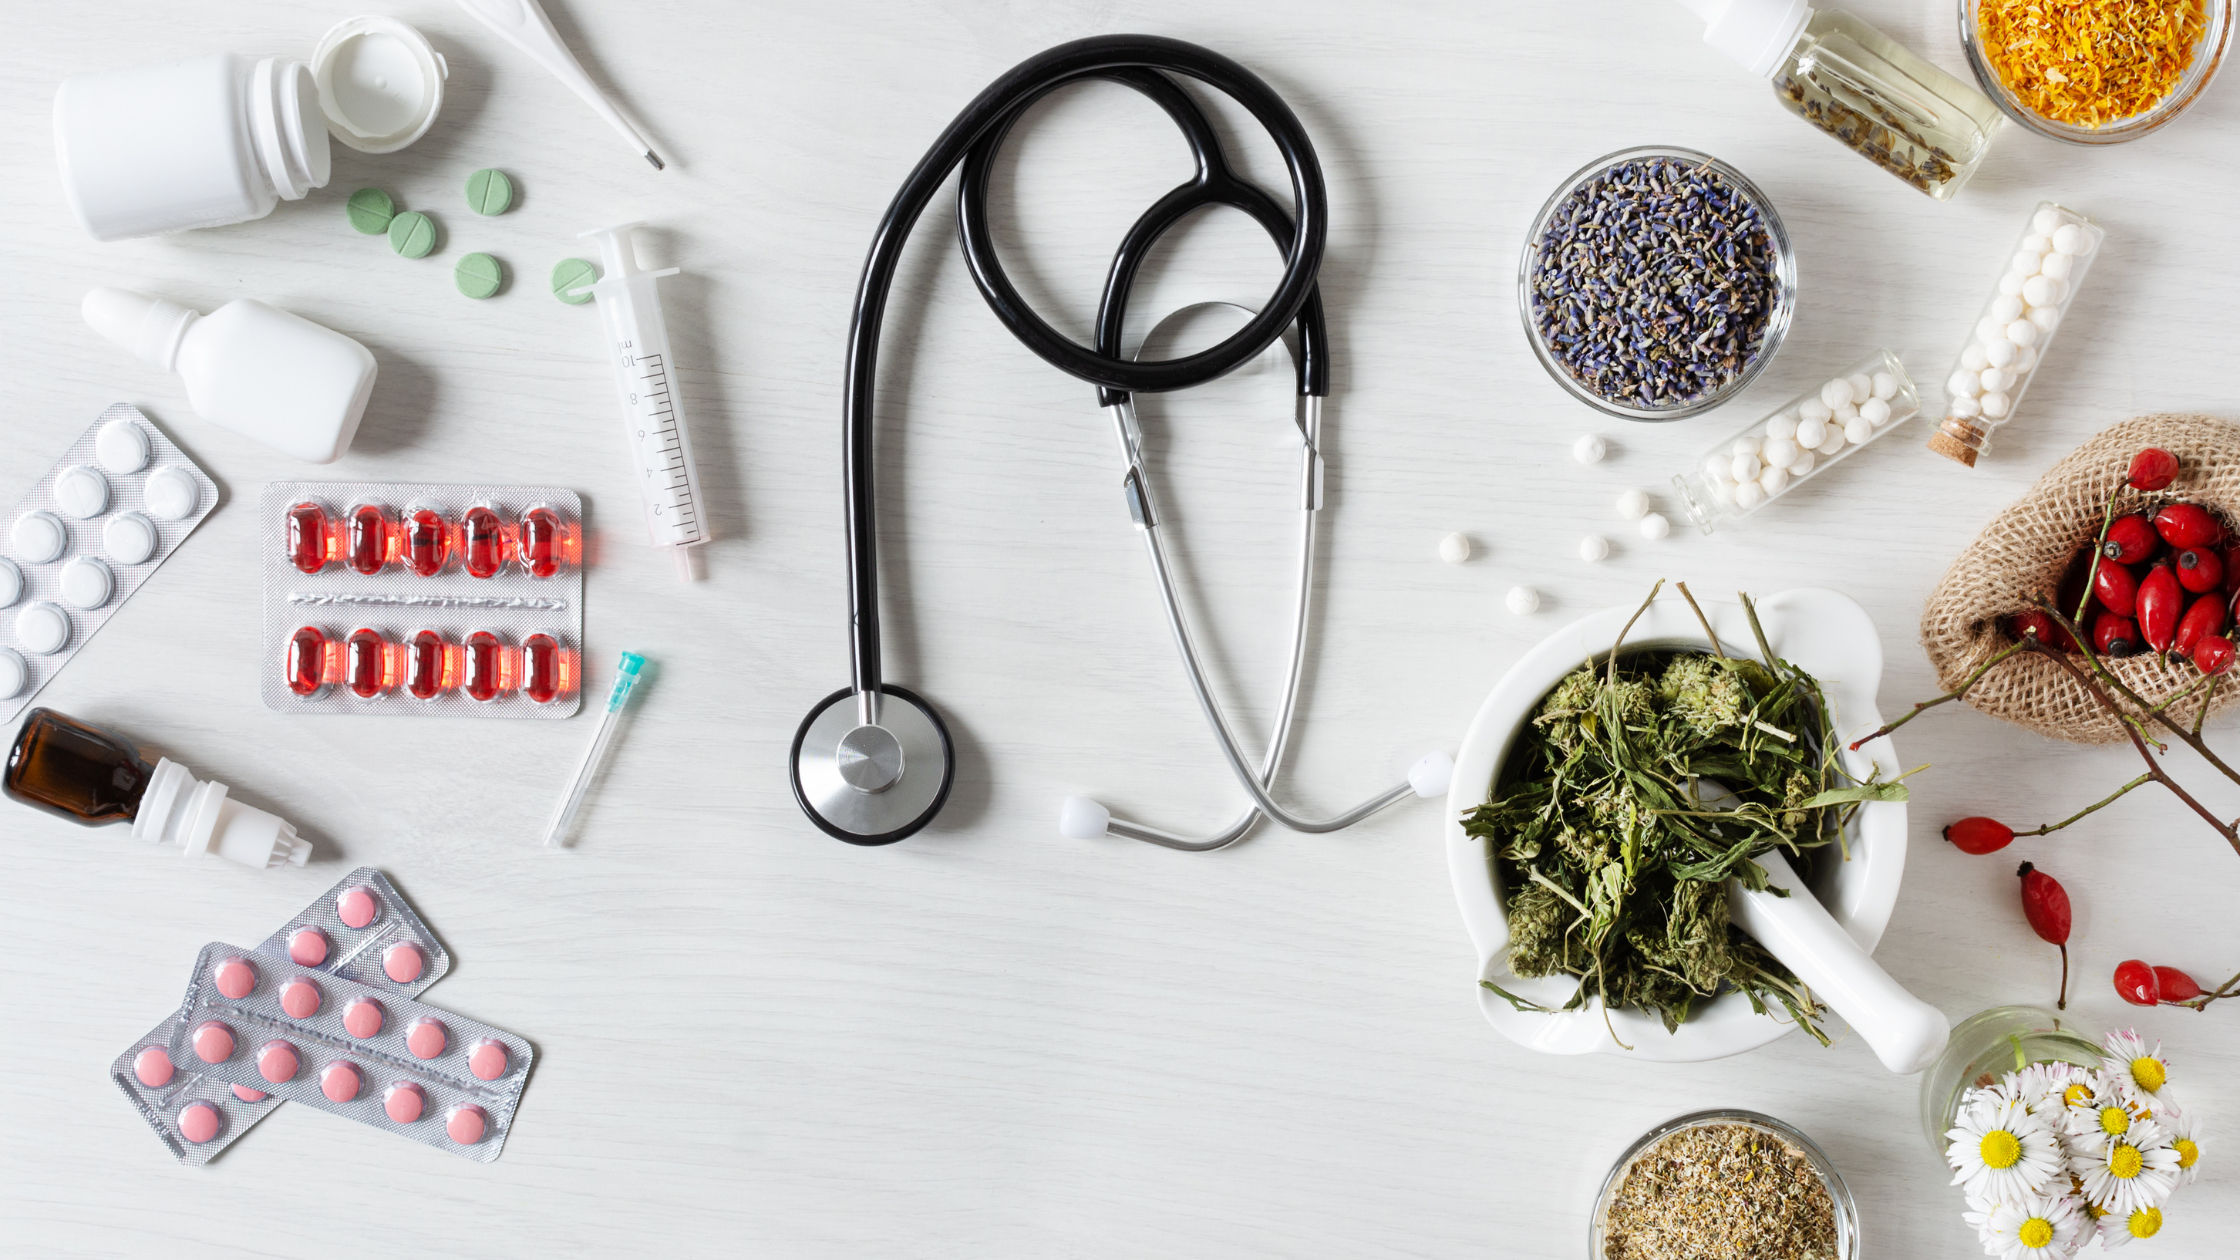 tabletop covered in medicines, herbs, and medical devices